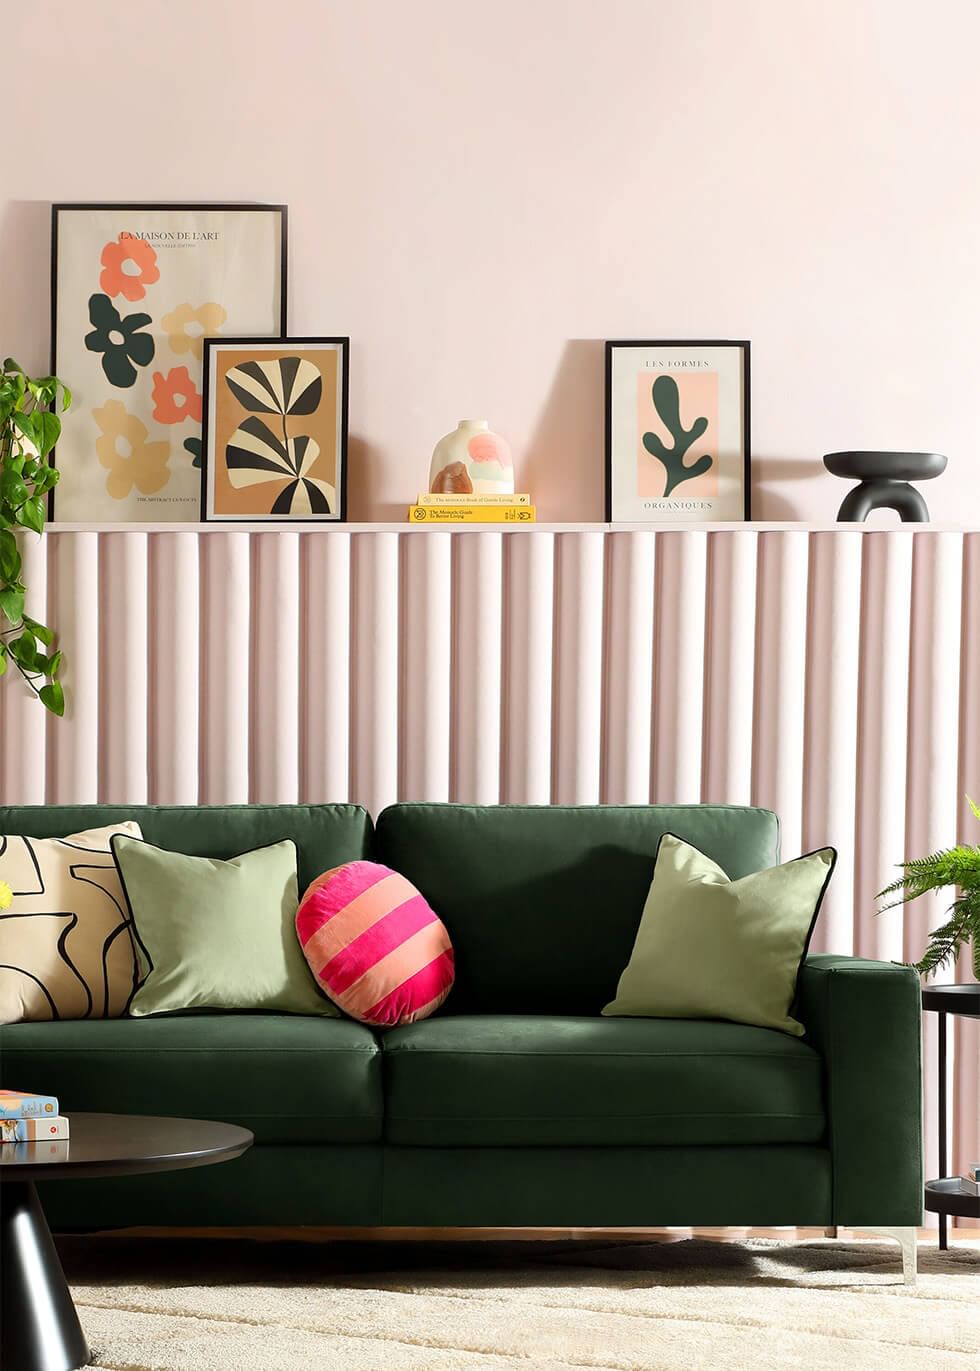 Mid-century modern living room with retro colour palette and artwork